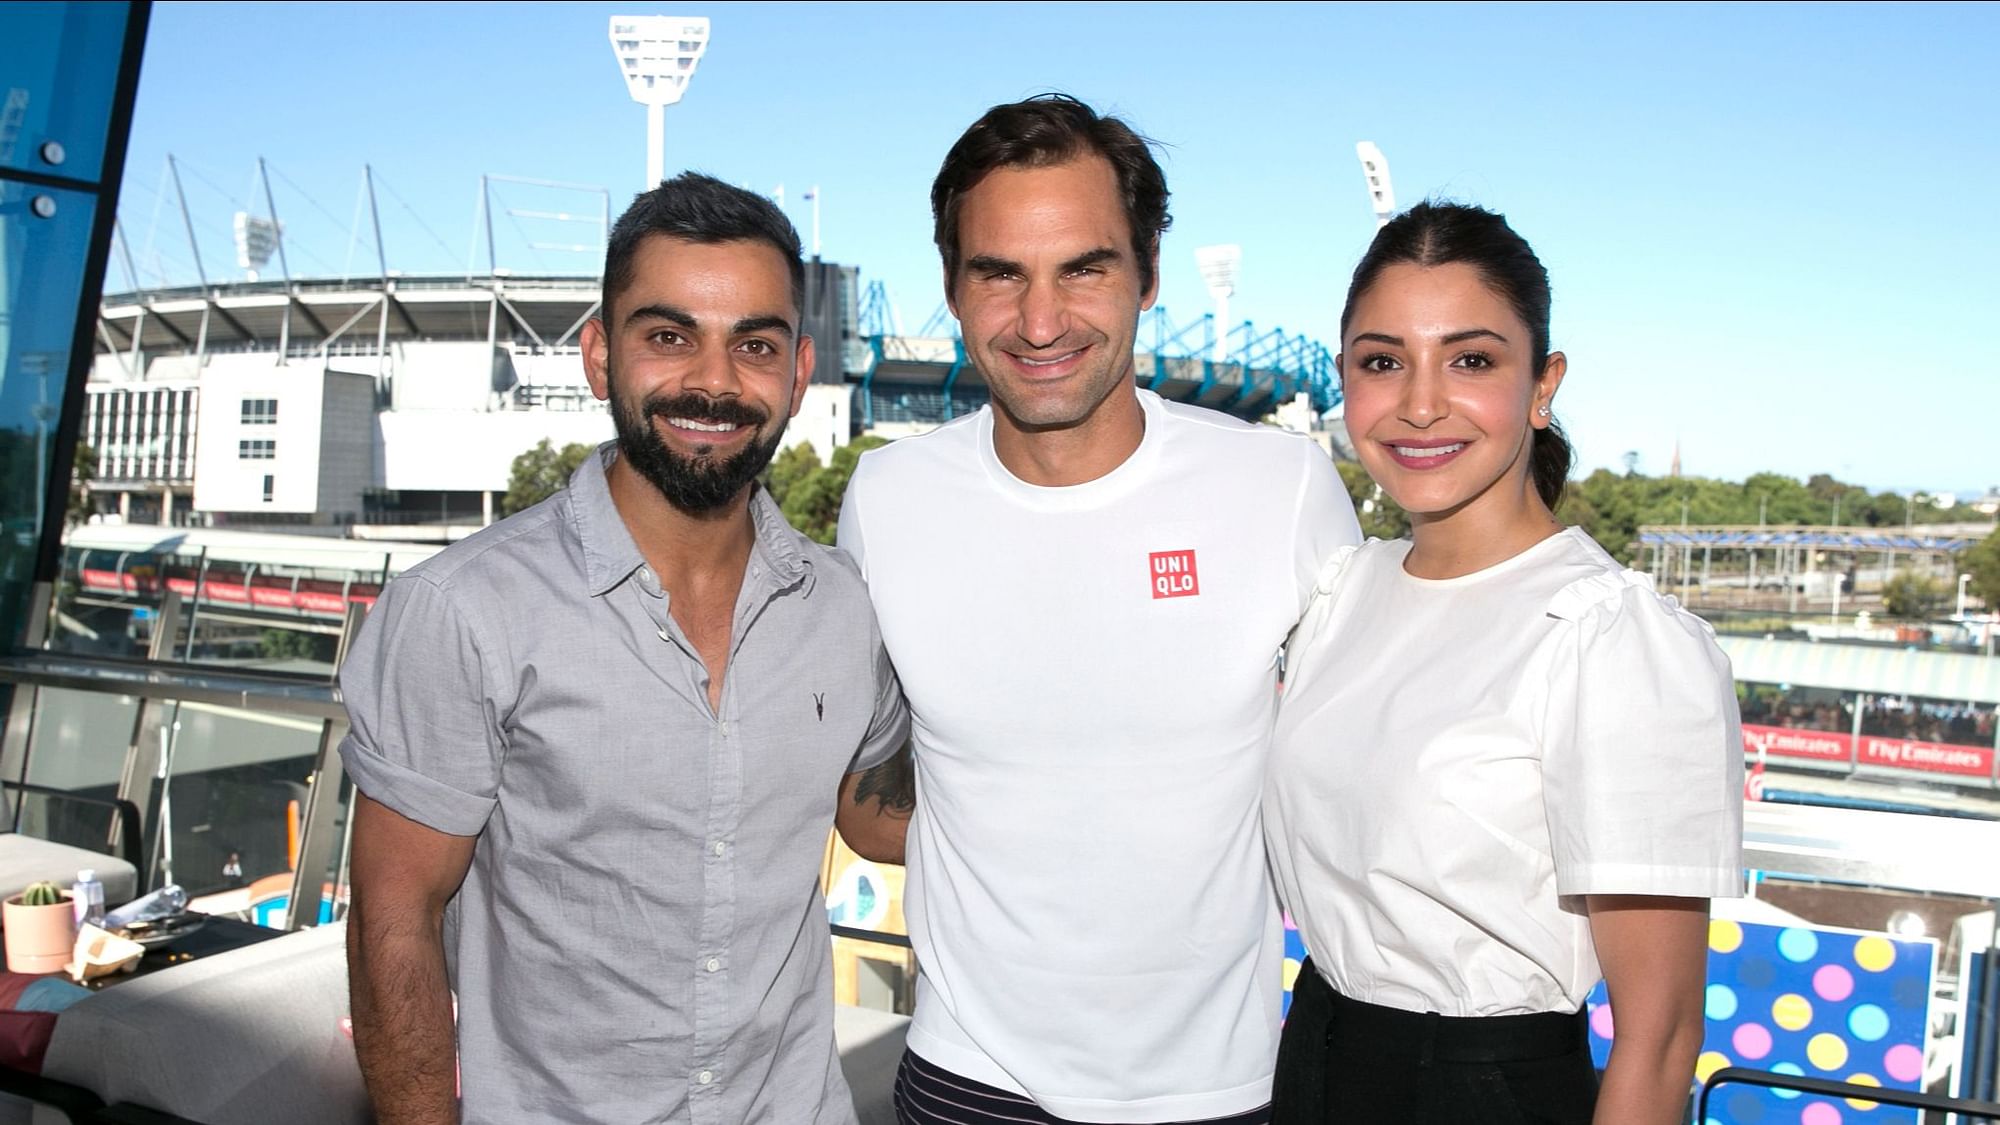 <div class="paragraphs"><p>Indian cricket captain Virat Kohli and wife Anushka Sharma photographed with Roger Federer on Day 6 of the Australian Open 2019.</p></div>